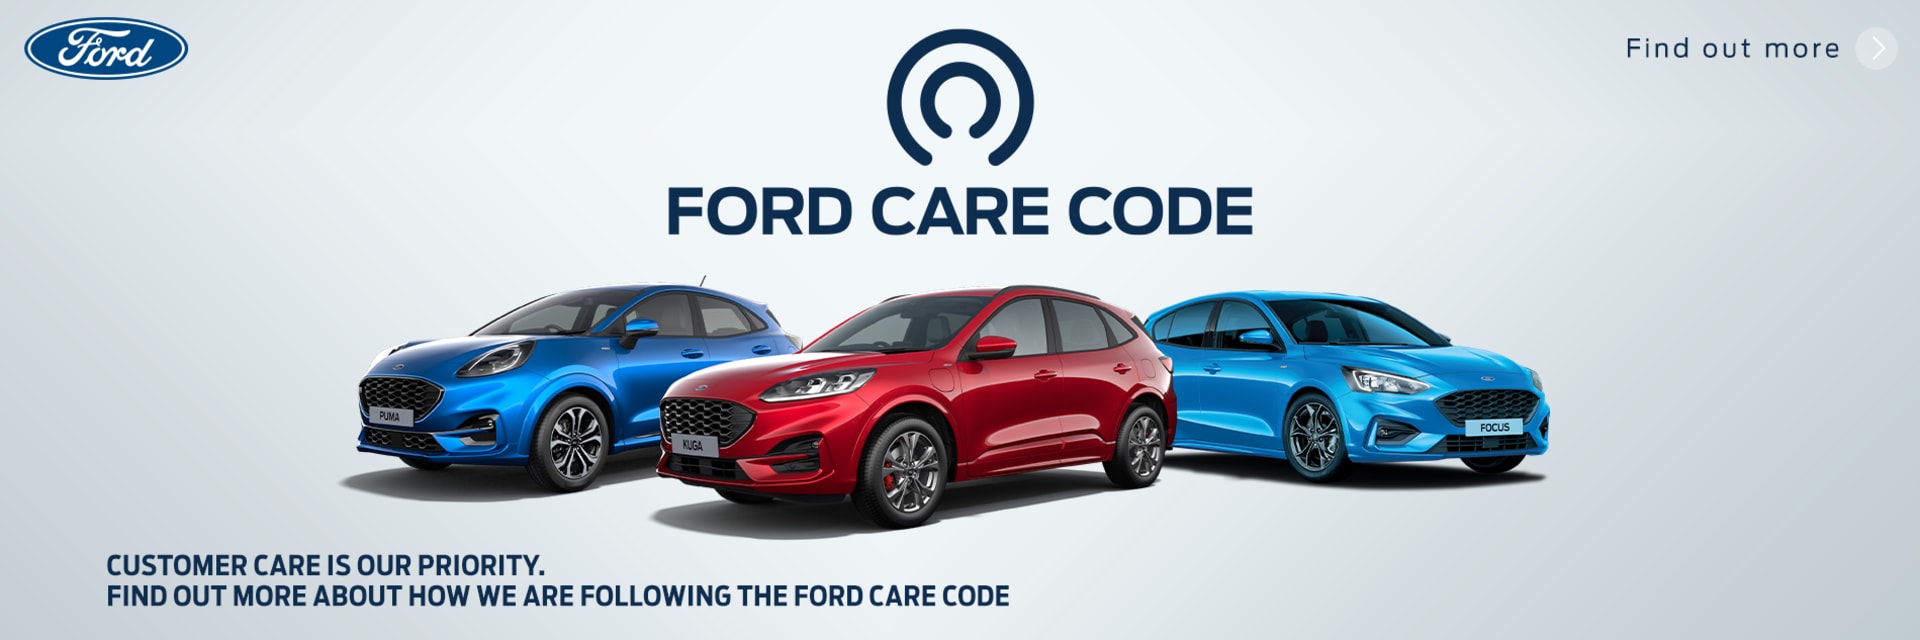 Ford Care Code